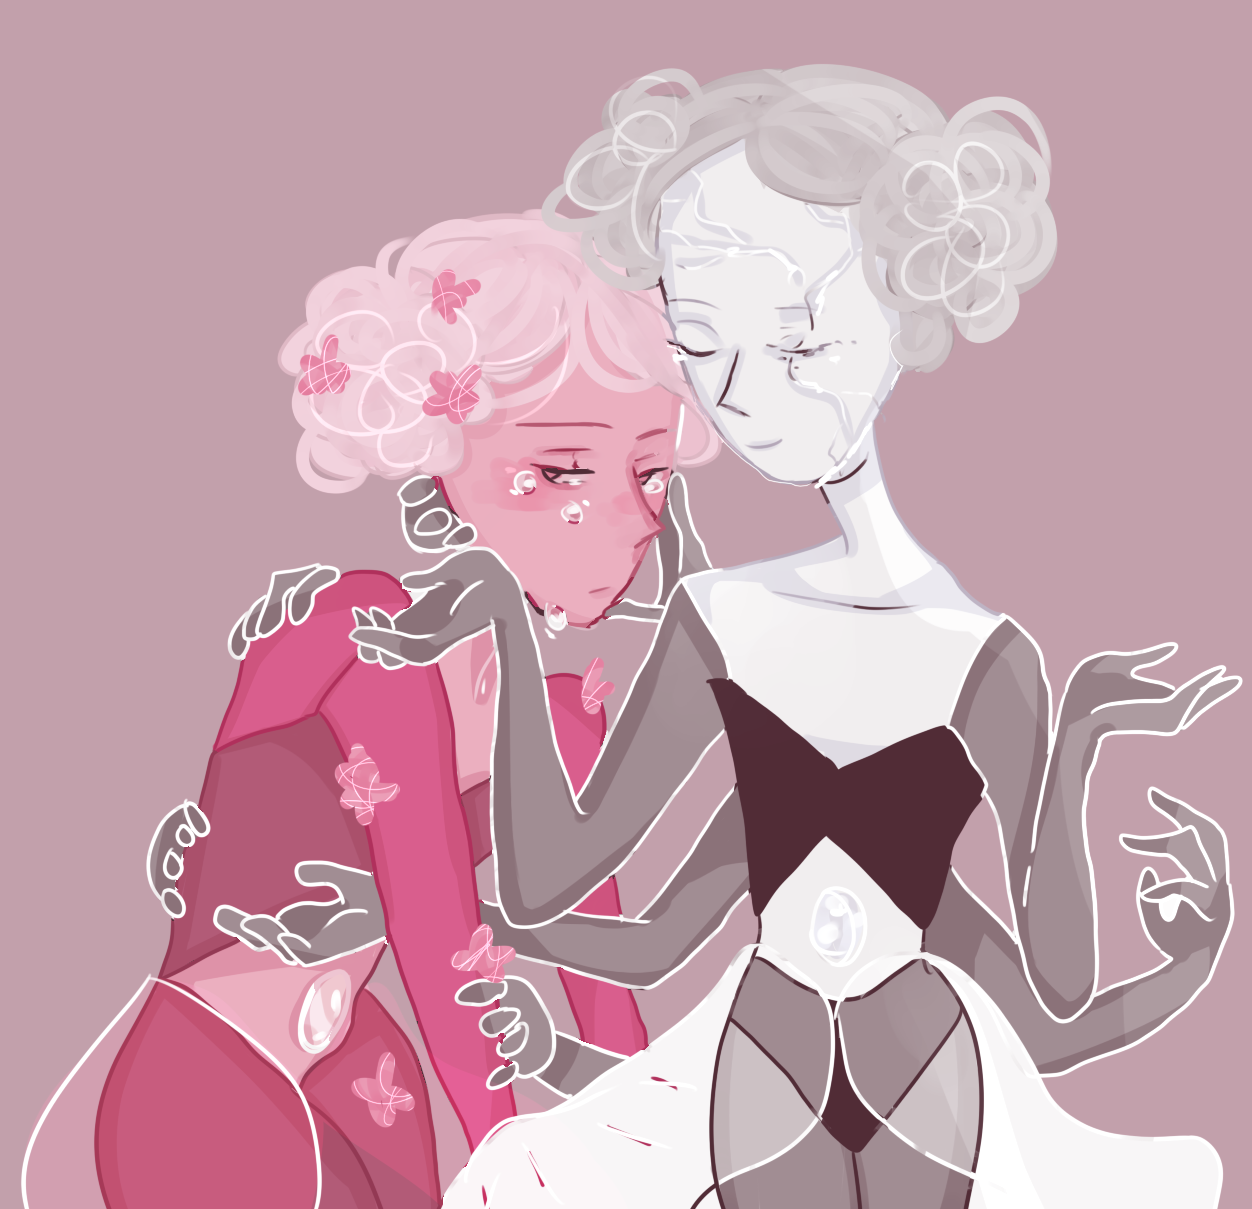 so what about that theory that white pearl is actually pink pearl